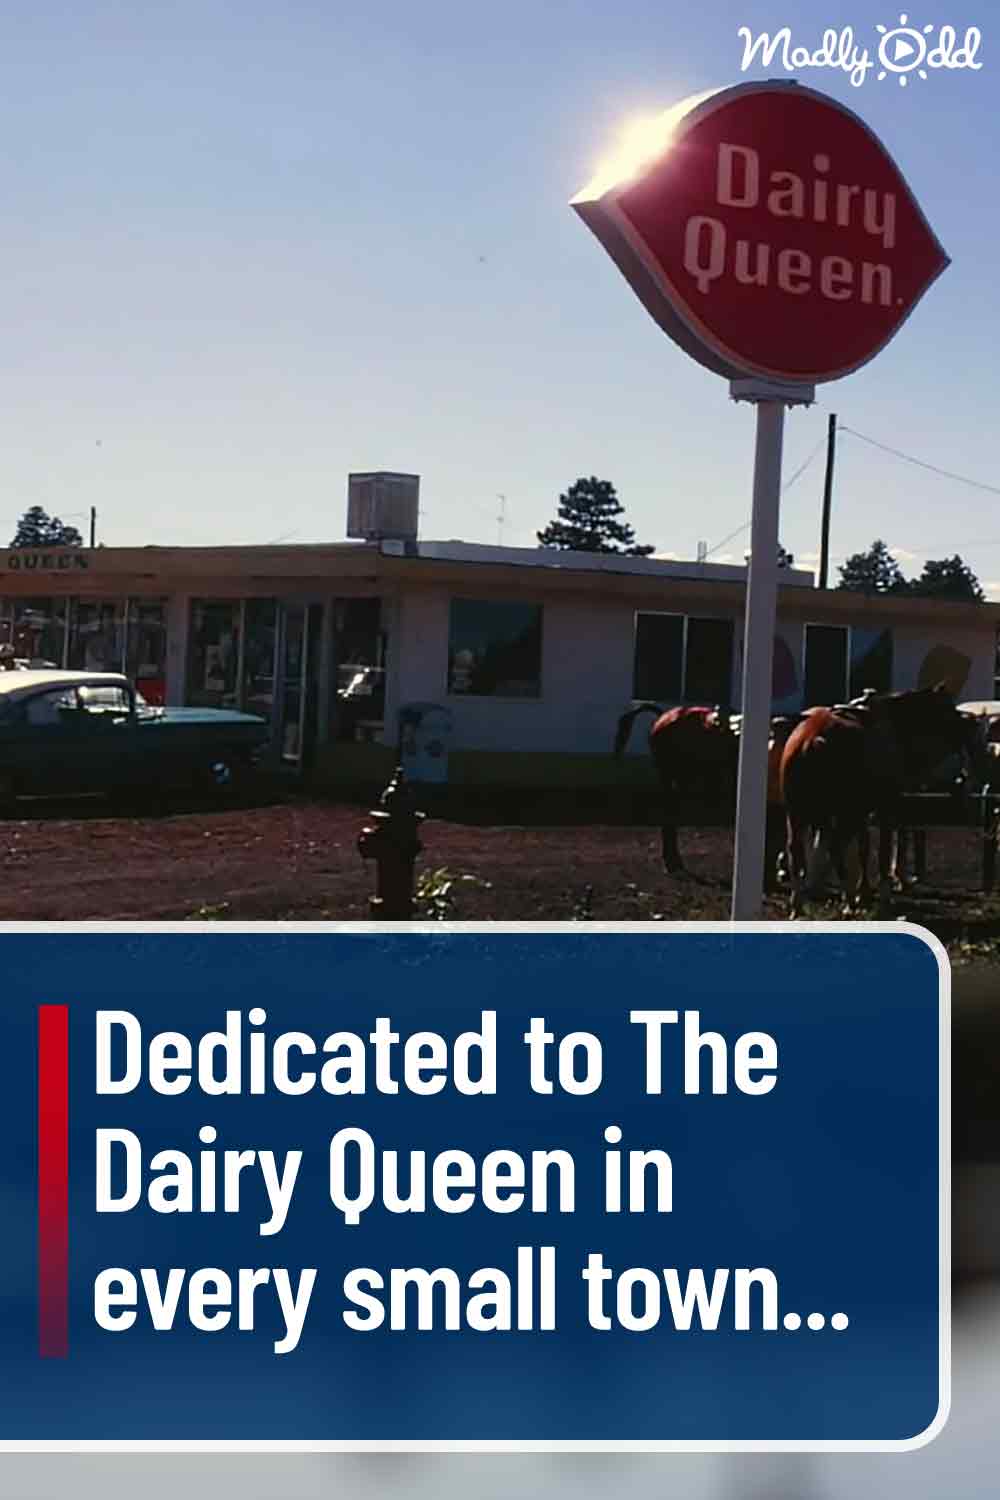 Dedicated to The Dairy Queen in every small town...